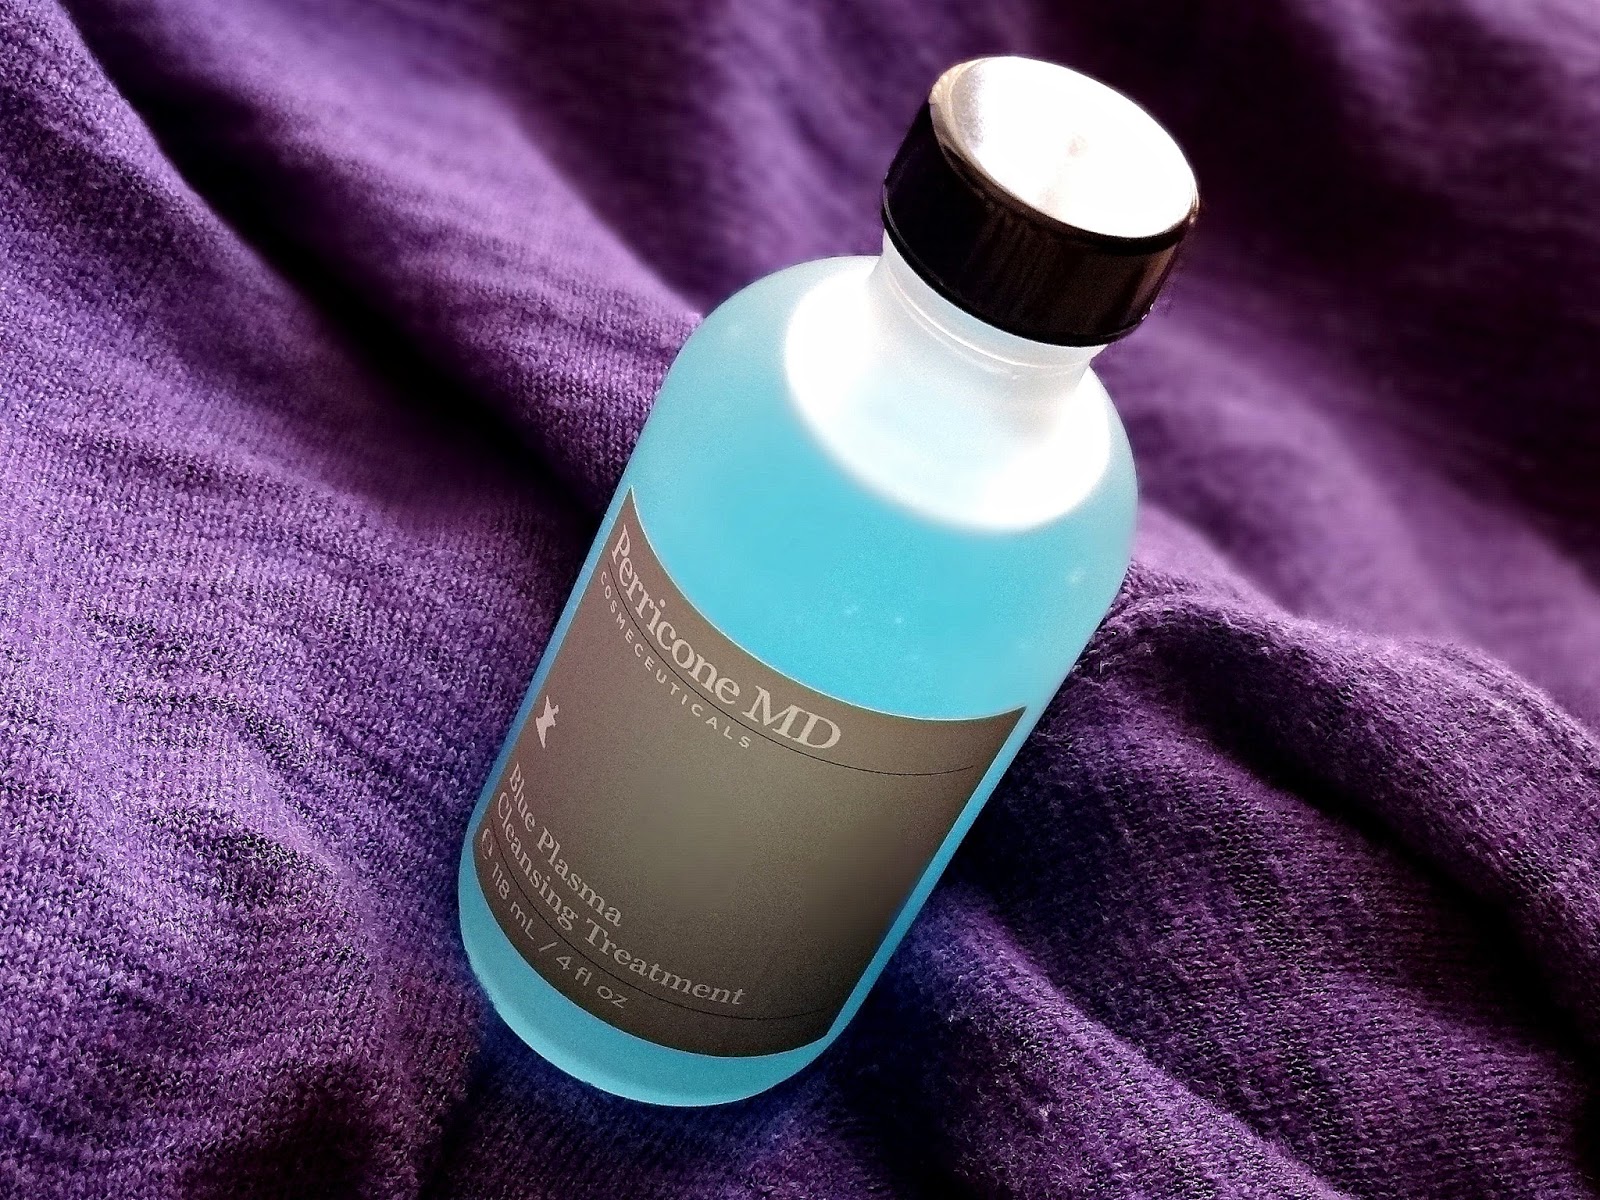 Perricone MD Blue Plasma Cleansing Treatment Review, Photos